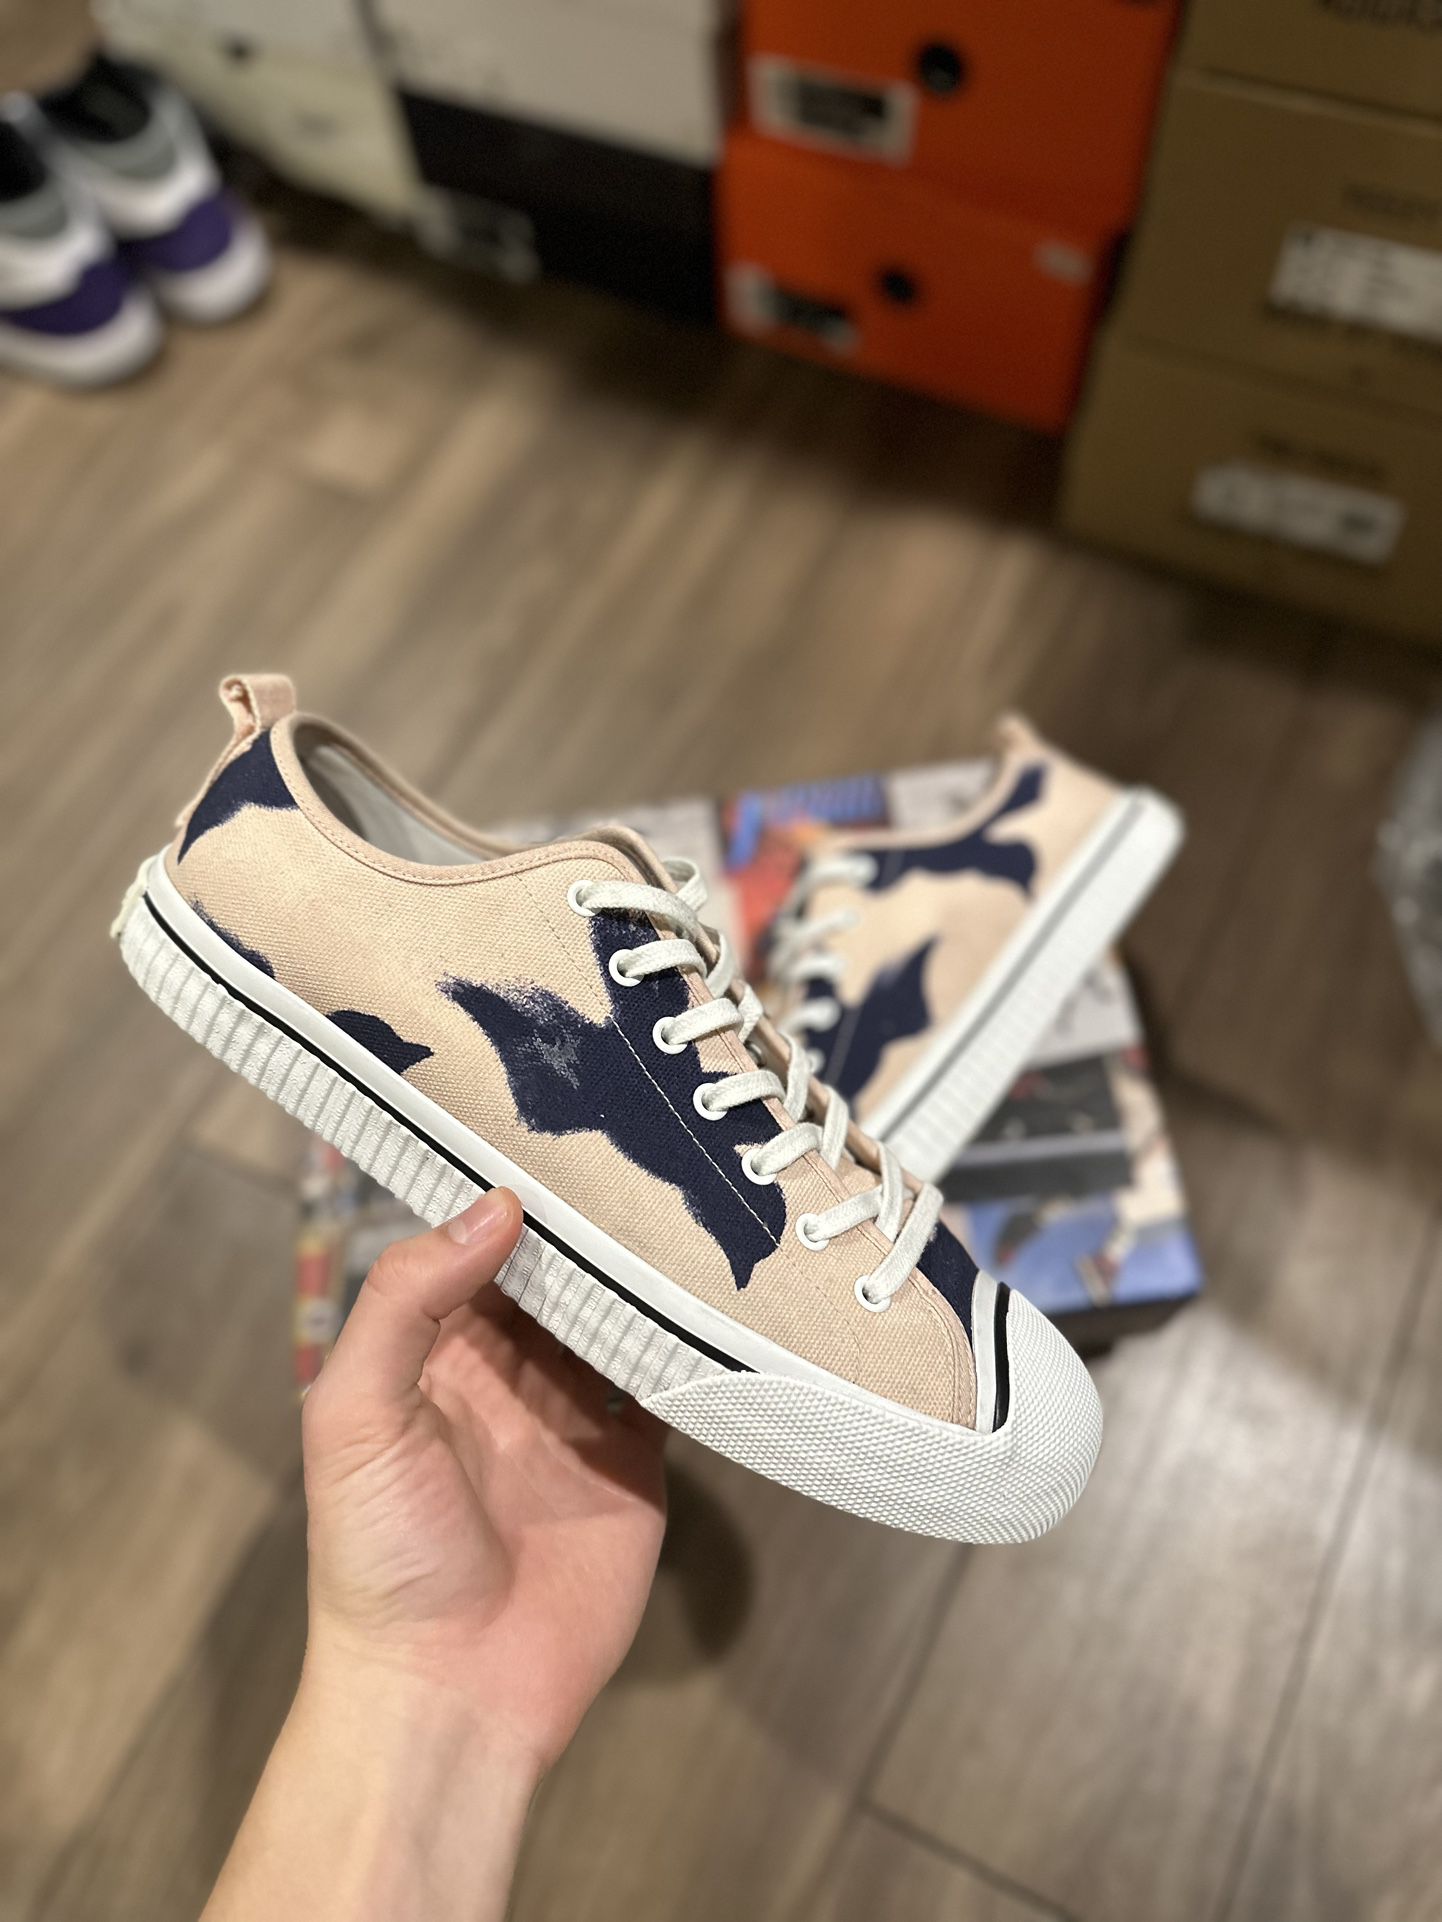 Burberry Converse Low Size 11 for Sale in Las Vegas, NV - OfferUp